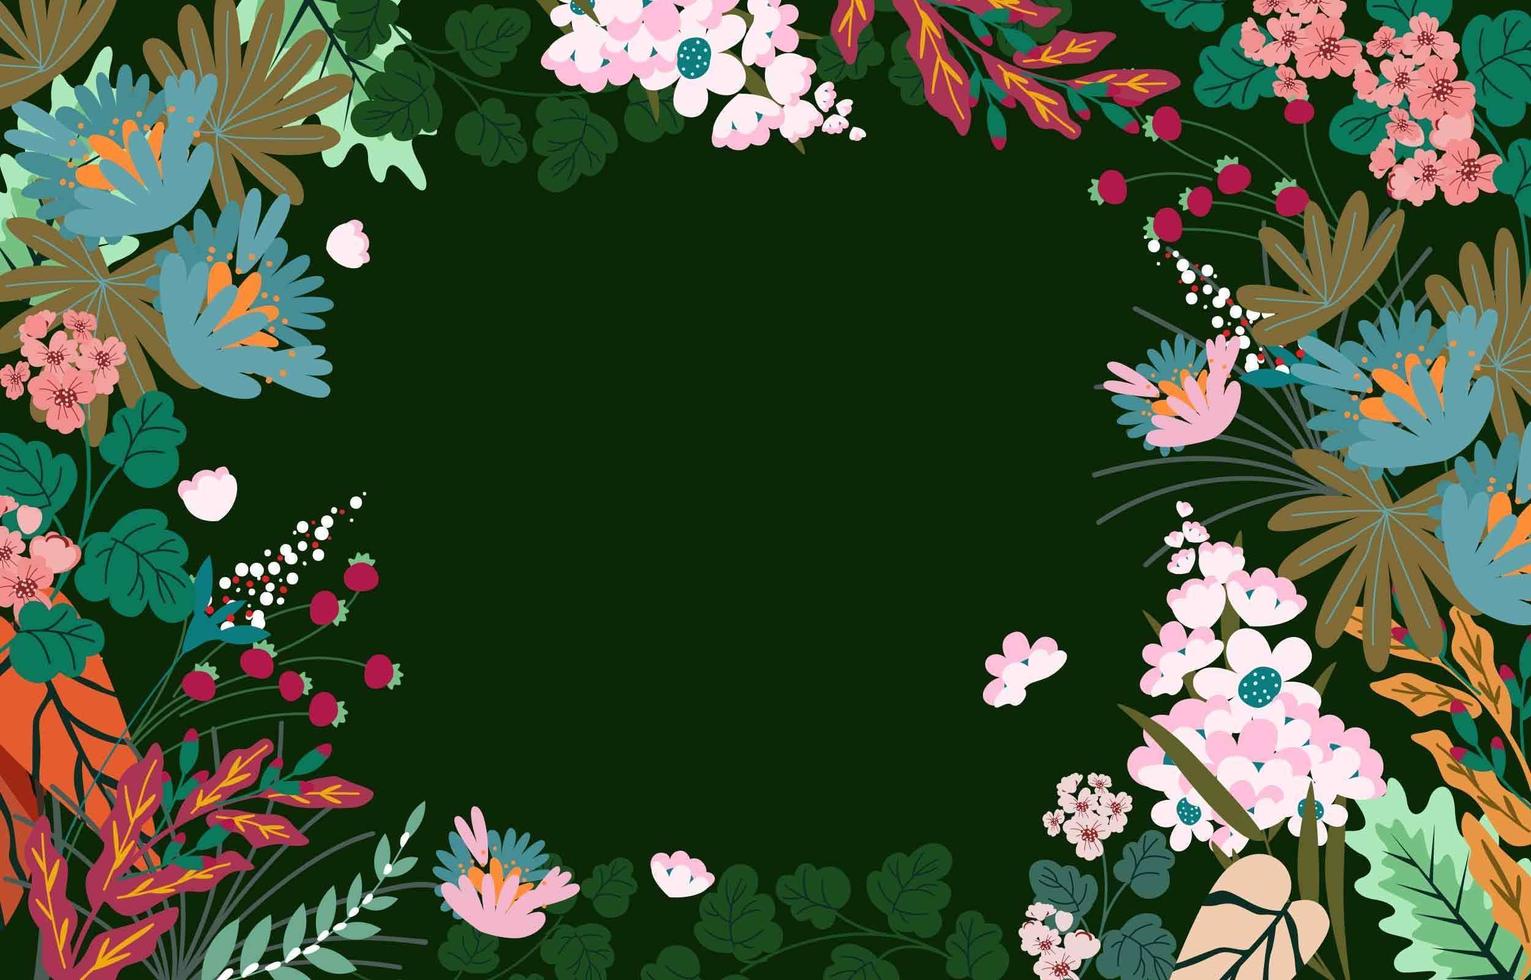 Floral Spring Background with Blossom Flowers vector